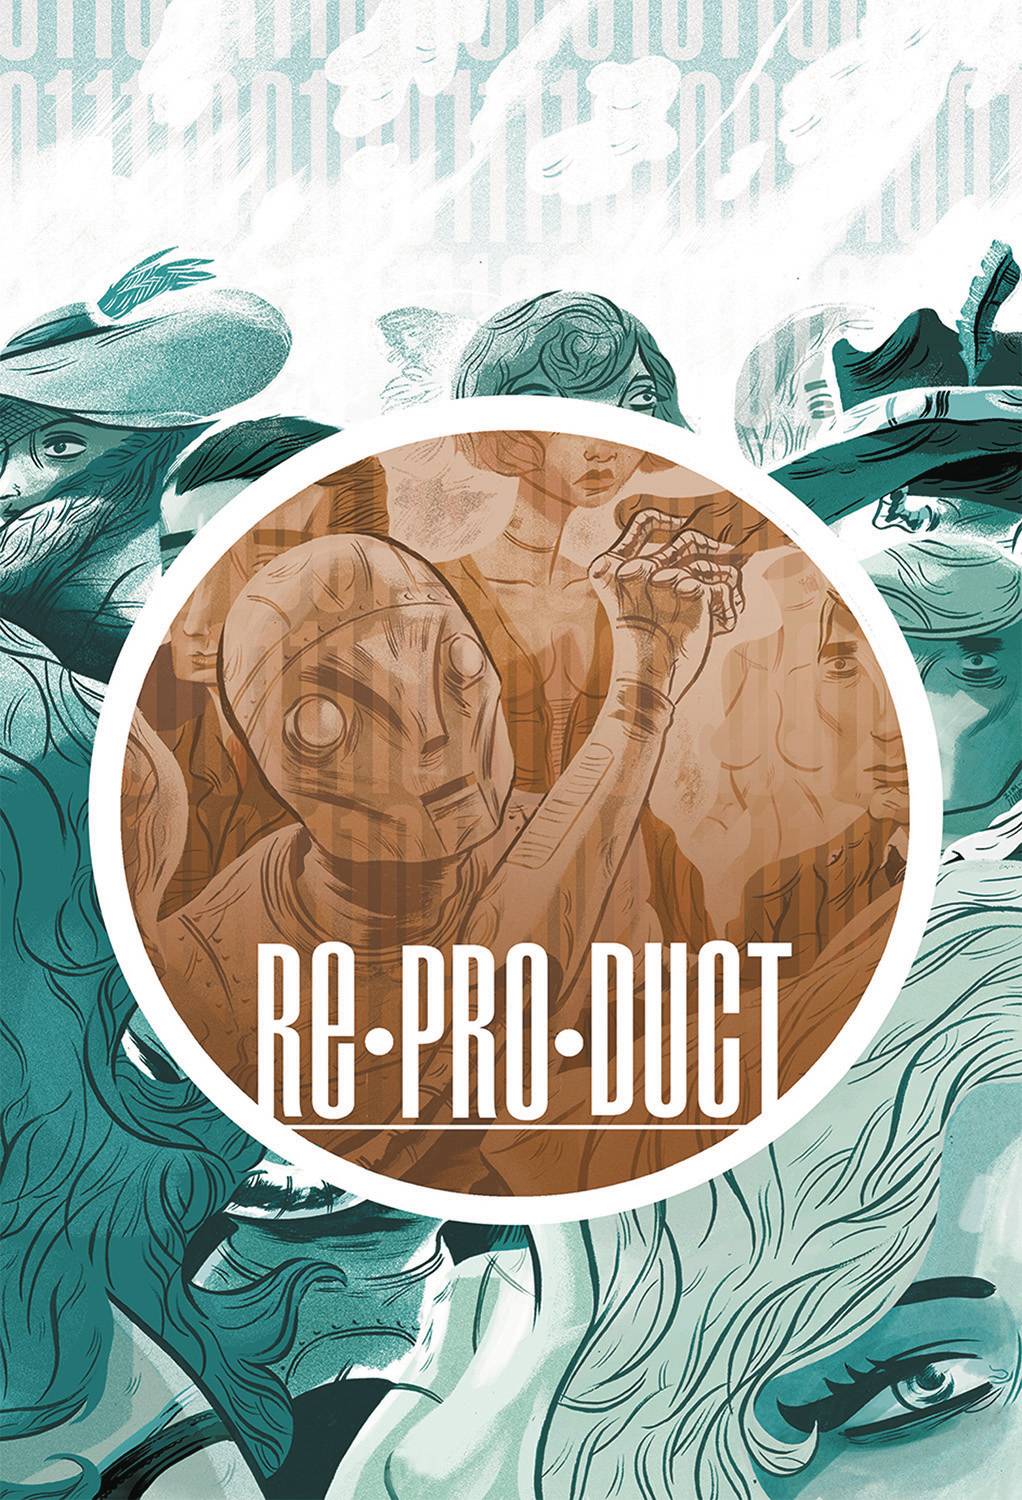 Re Pro Duct Hardcover Volume 1